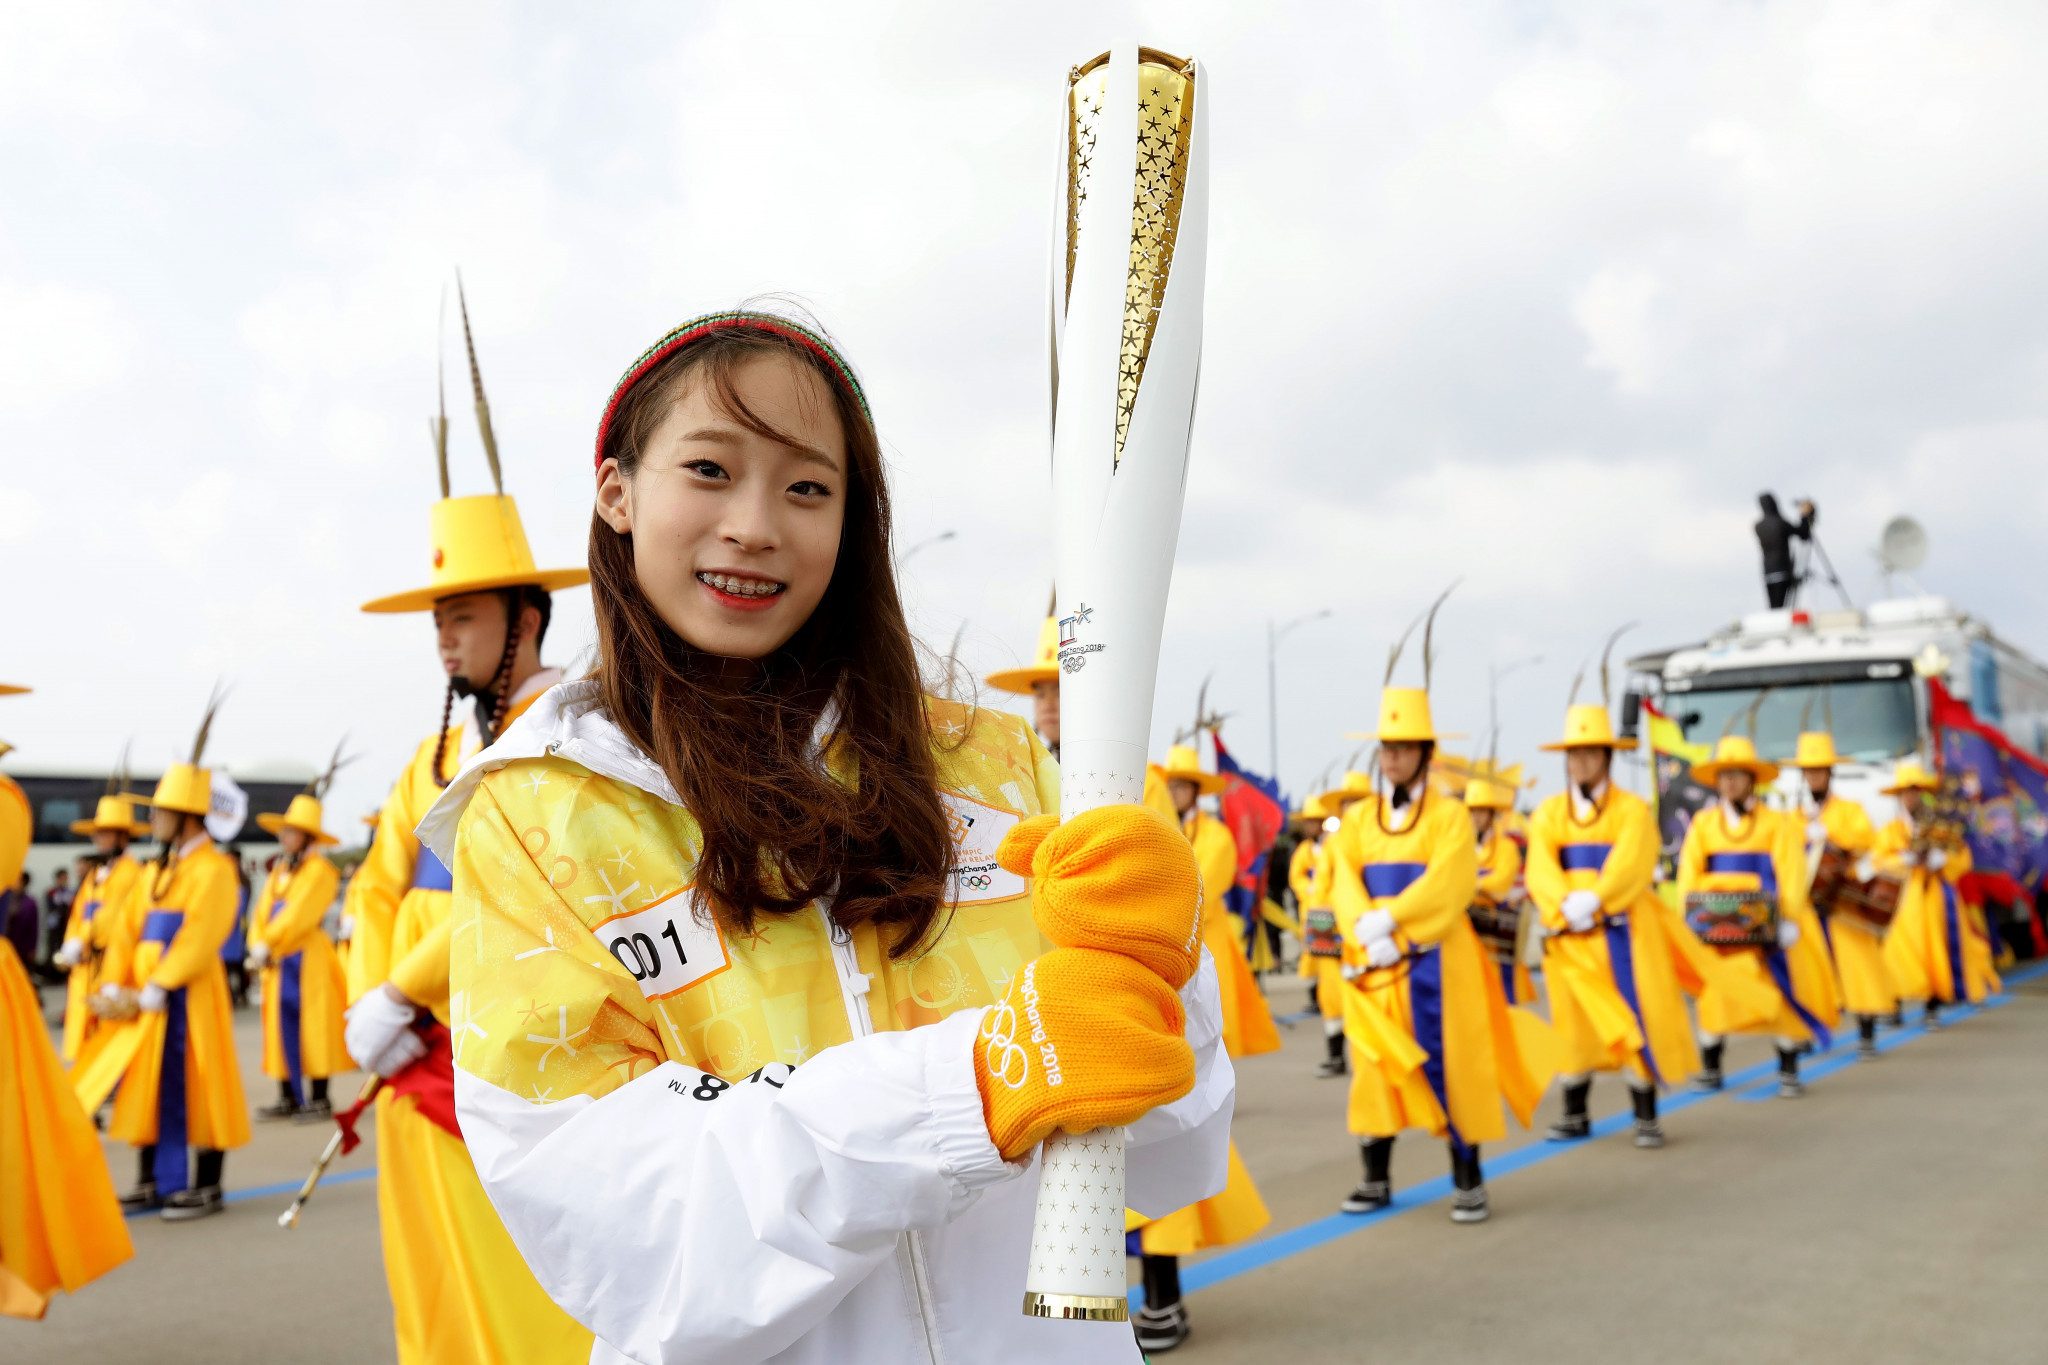 The Olympic Torch Relay has now passed through more than 20 cities since touching down in South Korea ©Getty Images